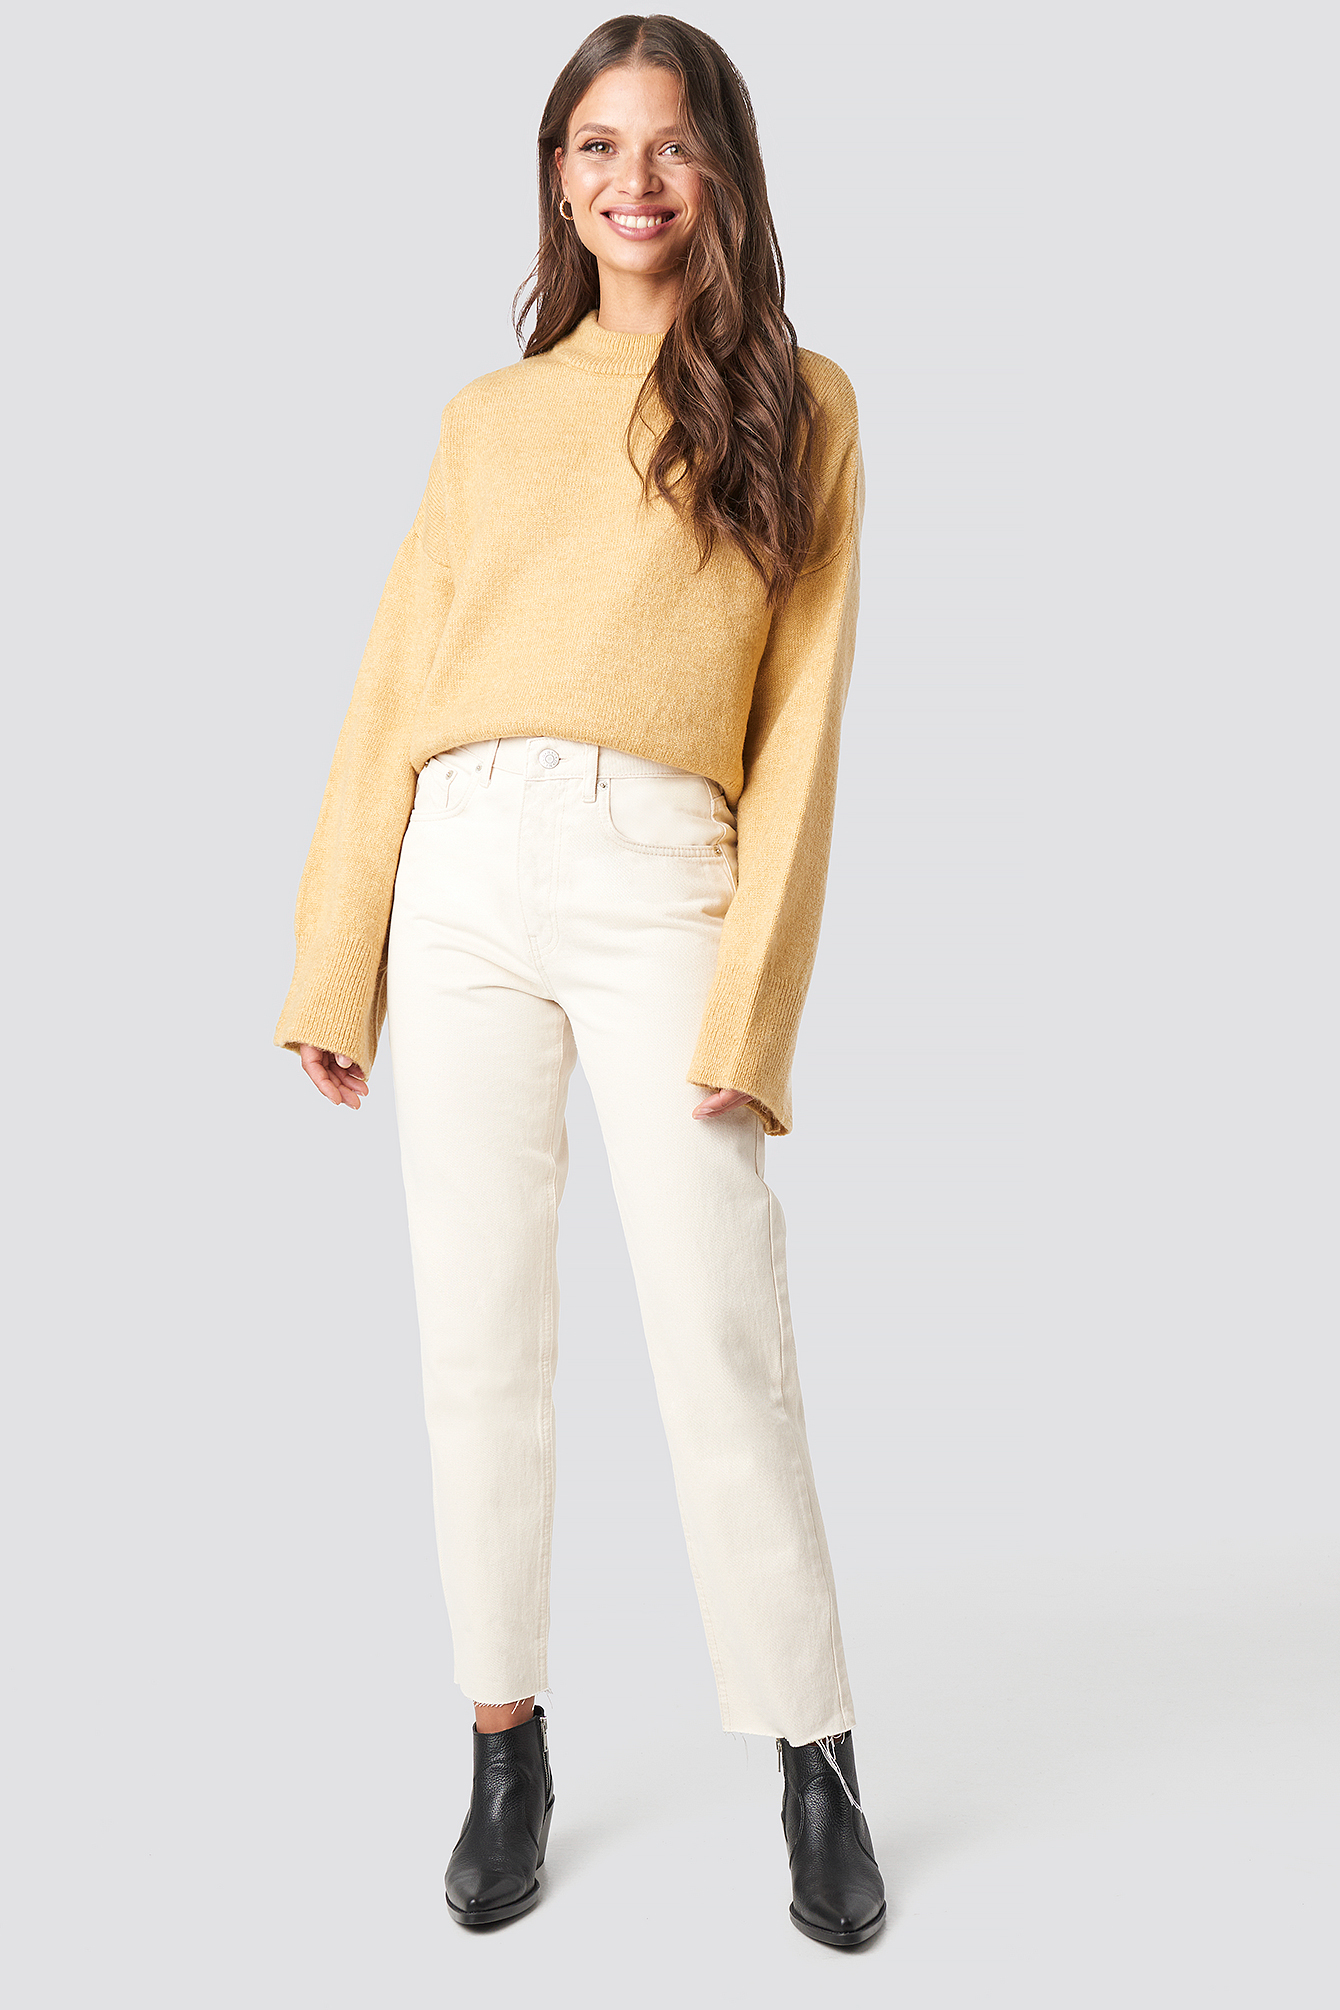 Dusty Yellow Wide Sleeve Round Neck Knitted Sweater